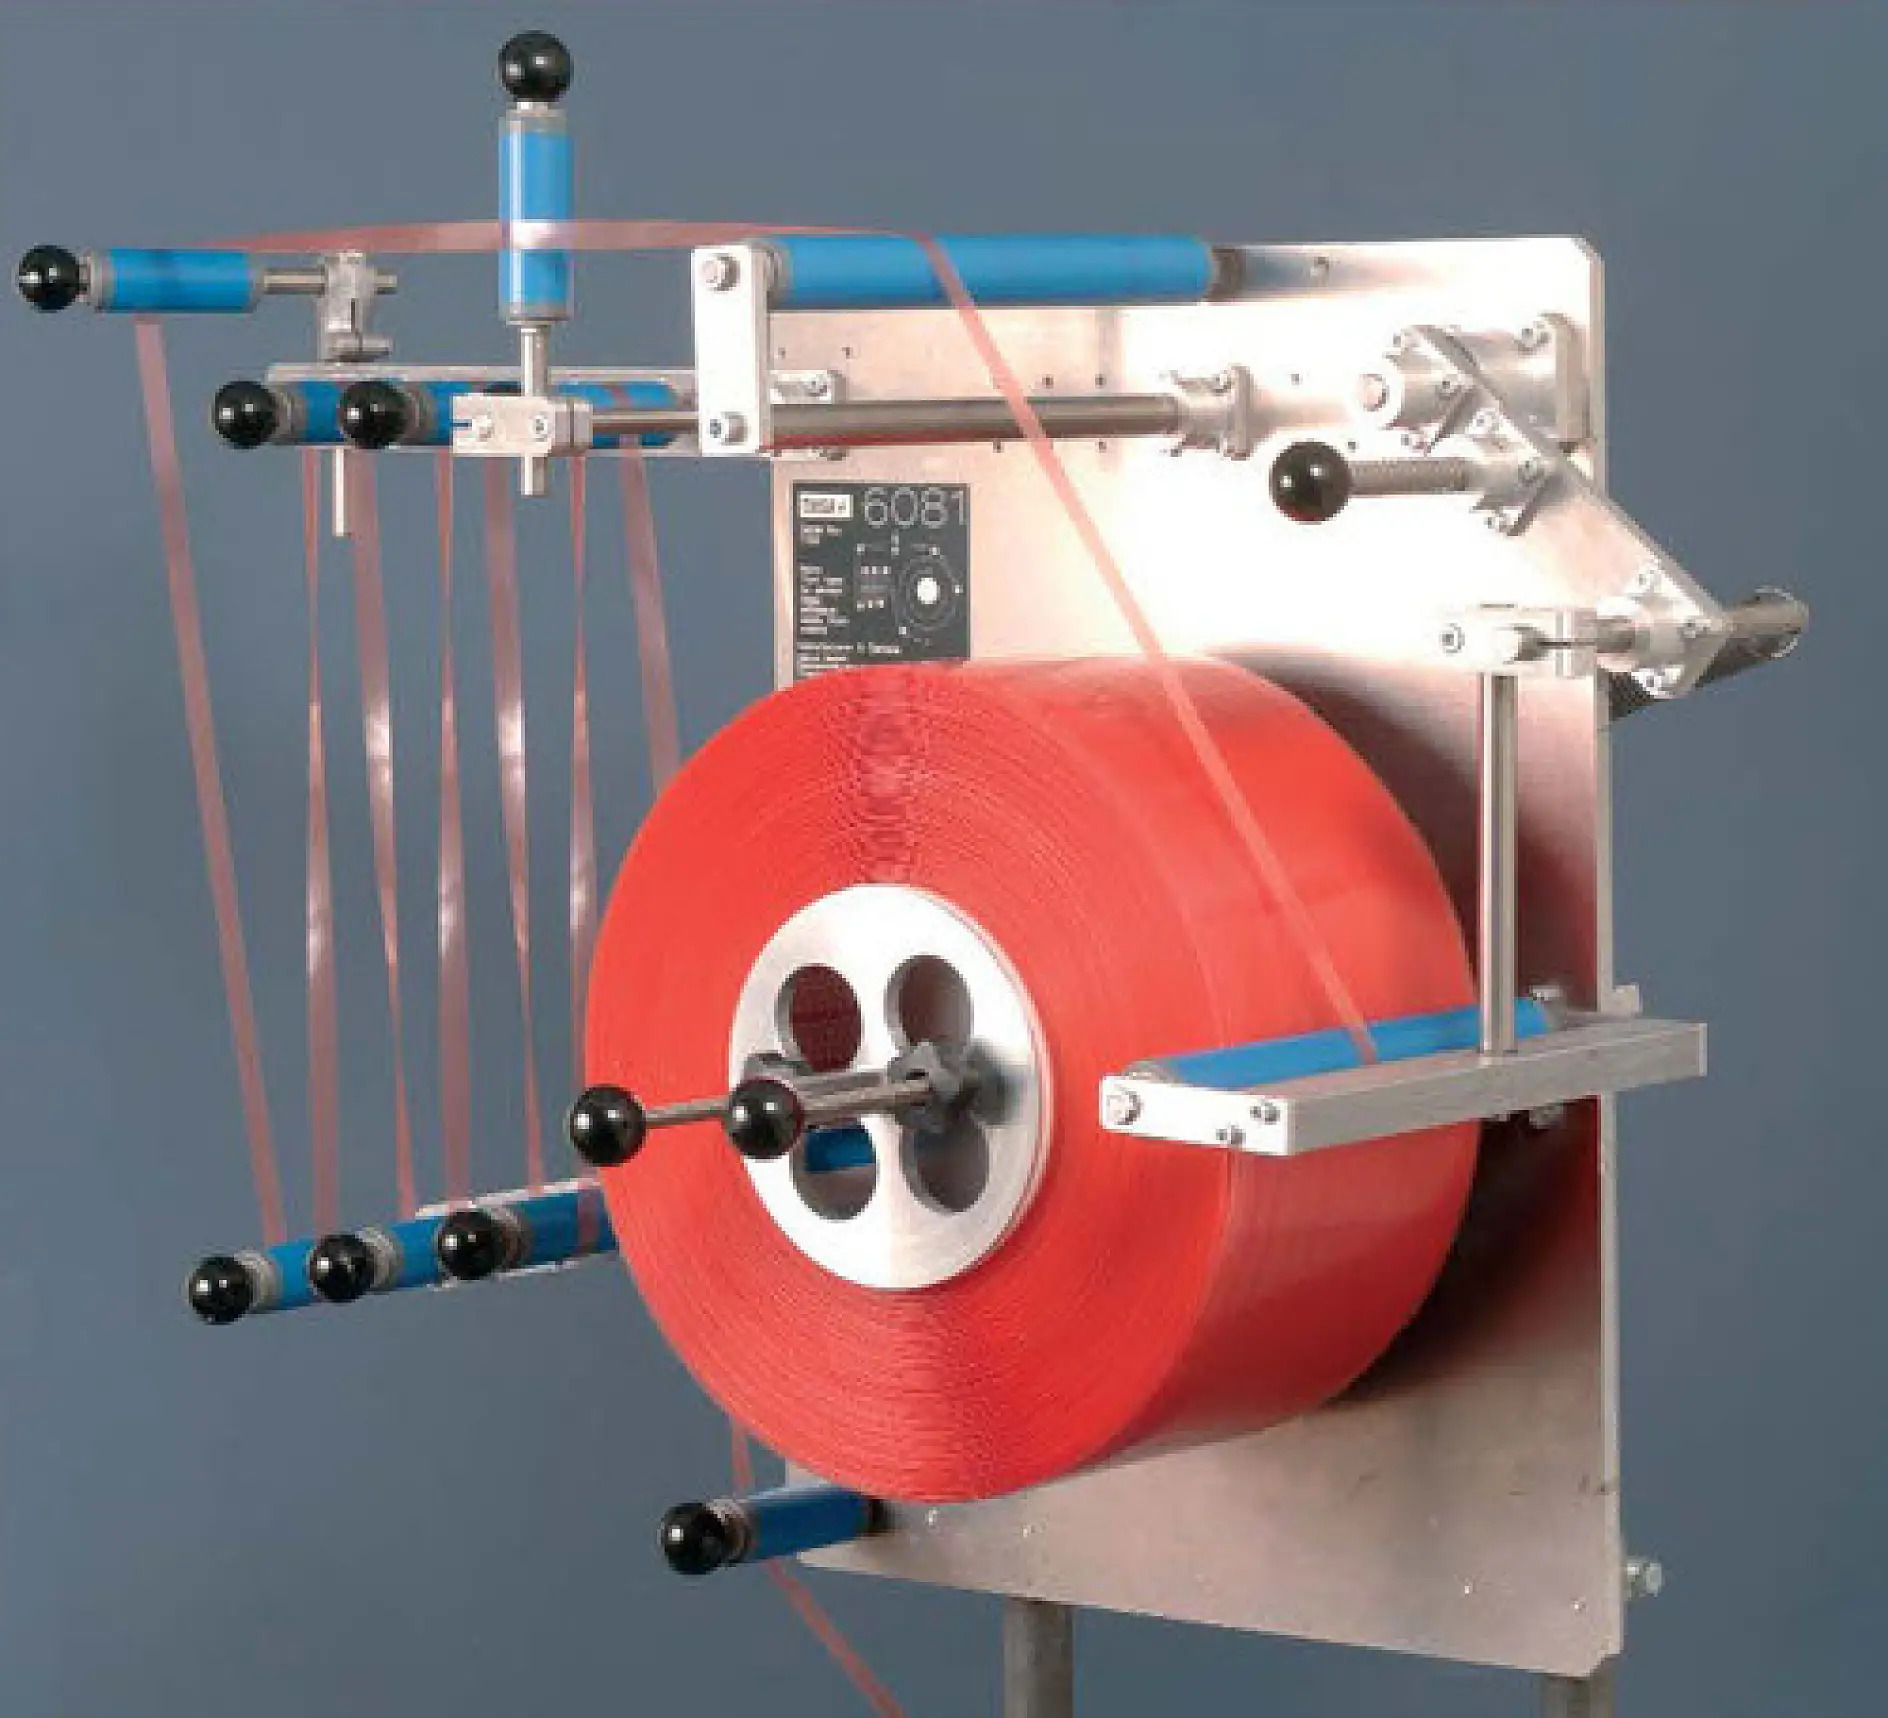 The Spool Dispenser tesa® 6081 is developed for the easy integration into the packaging process.